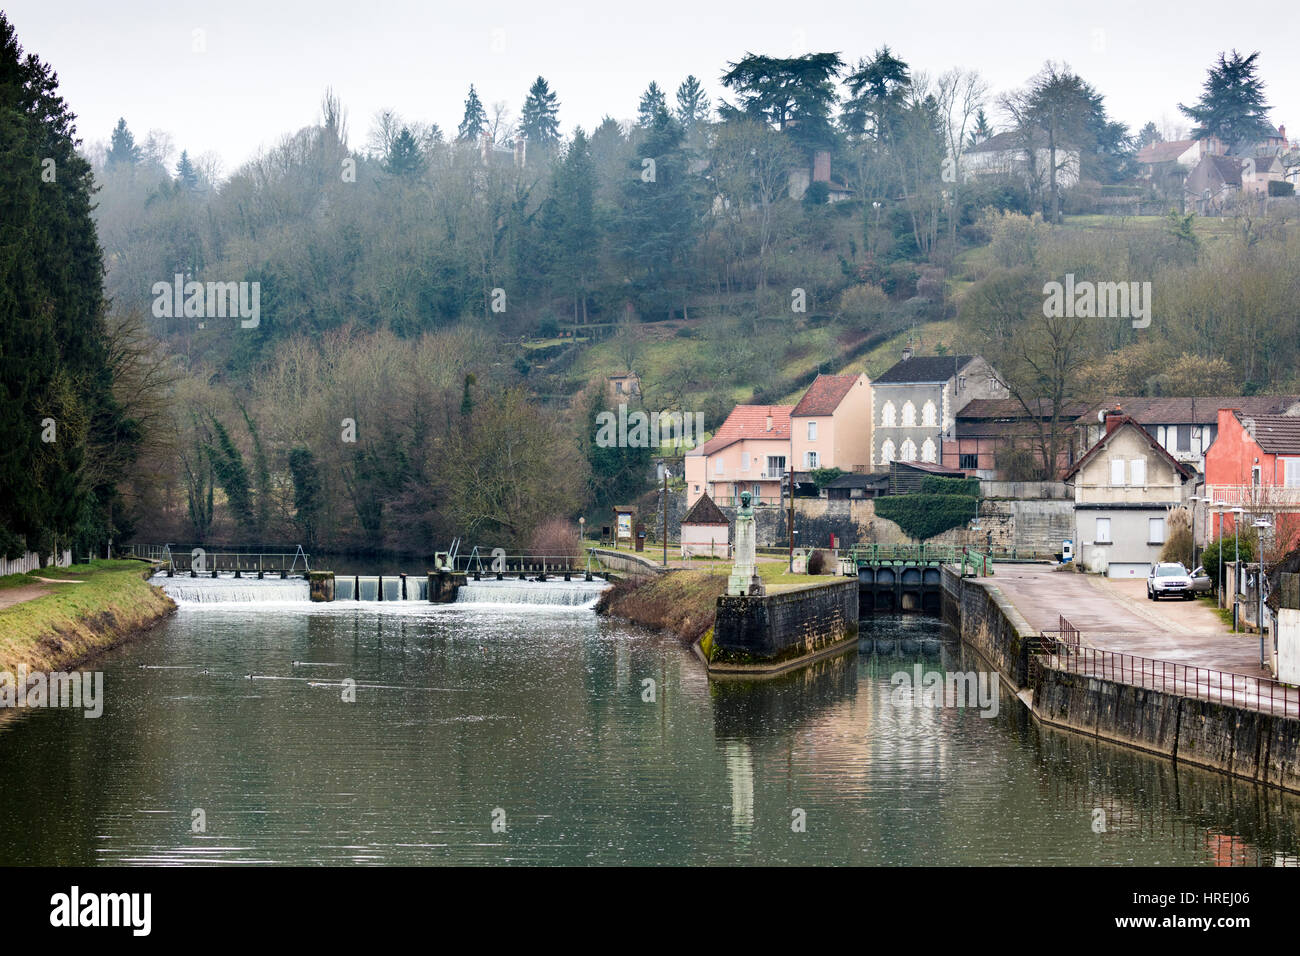 Lock and Dam on the Yonne River, Clamecy, Burgundy, France Stock Photo